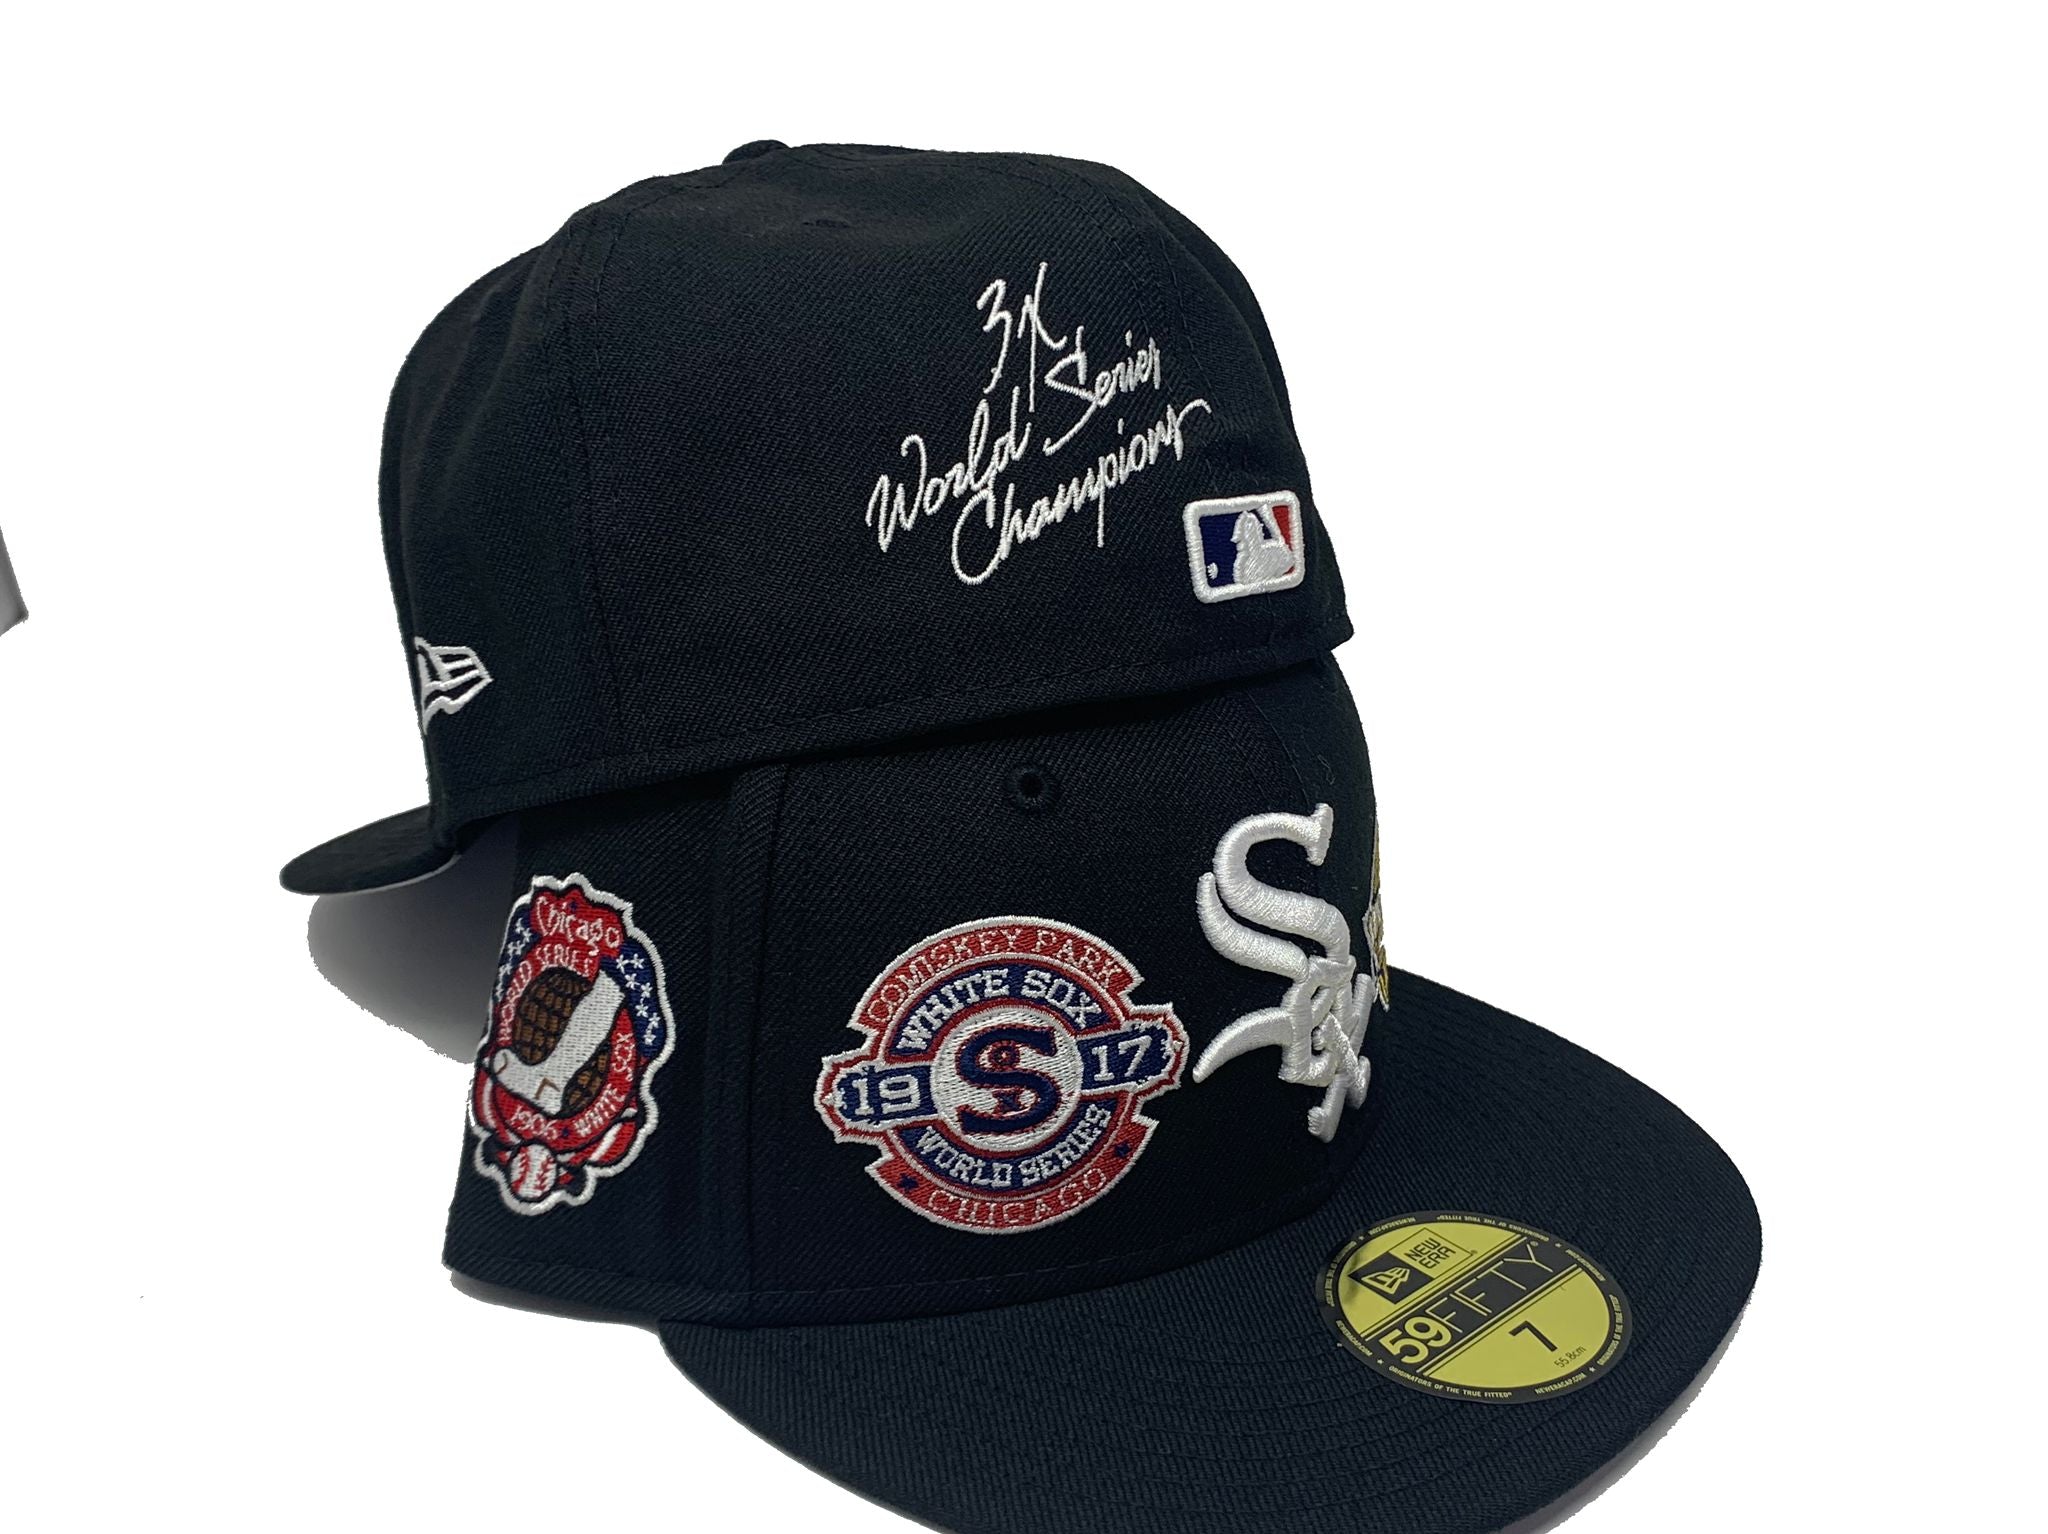 New Era Chicago White Sox World Champions 59FIFTY Fitted Cap in Black — Major